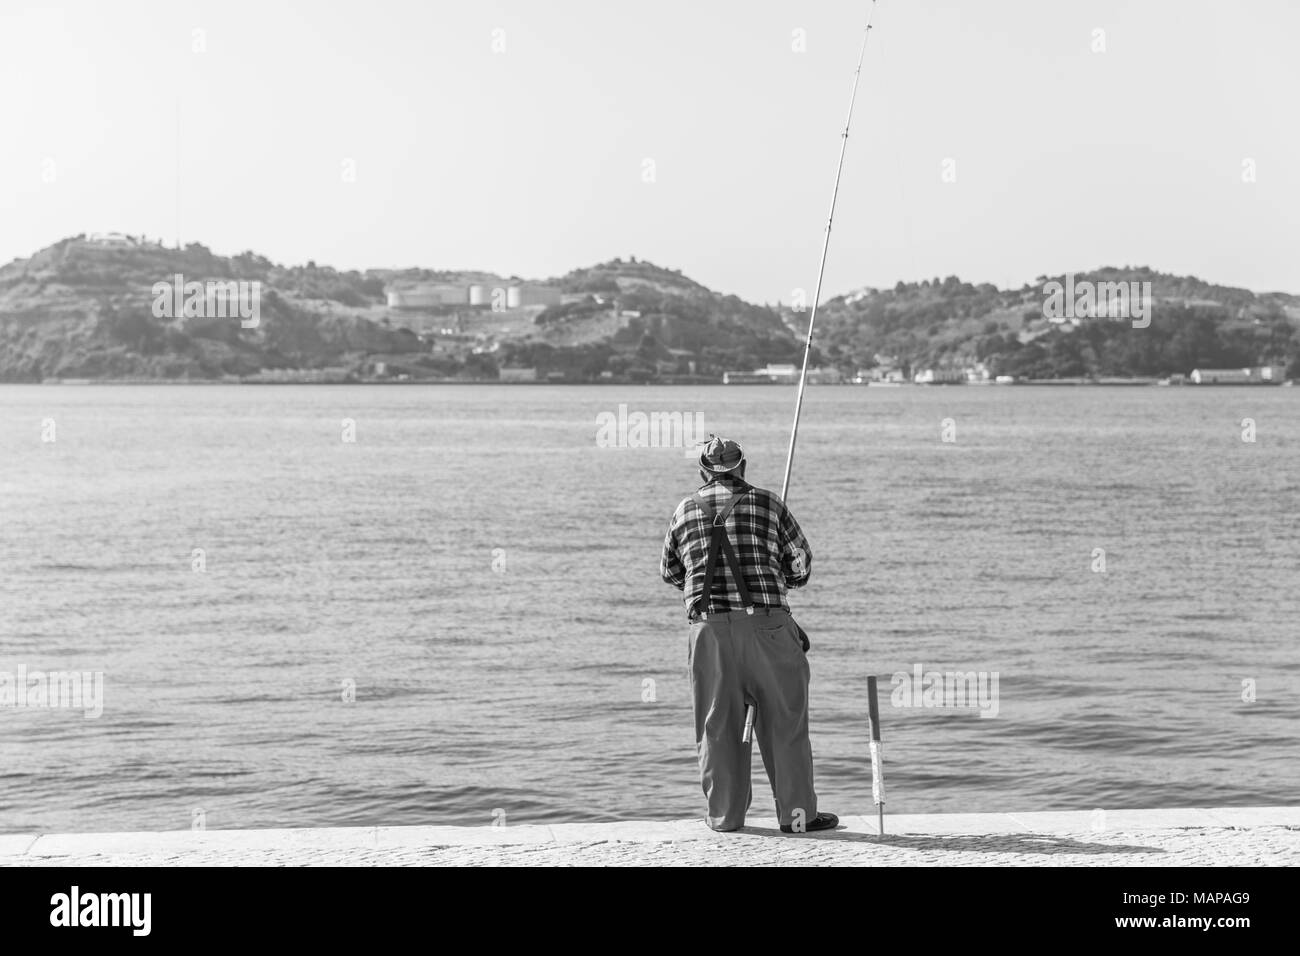 Fishing clears your mind Stock Photo